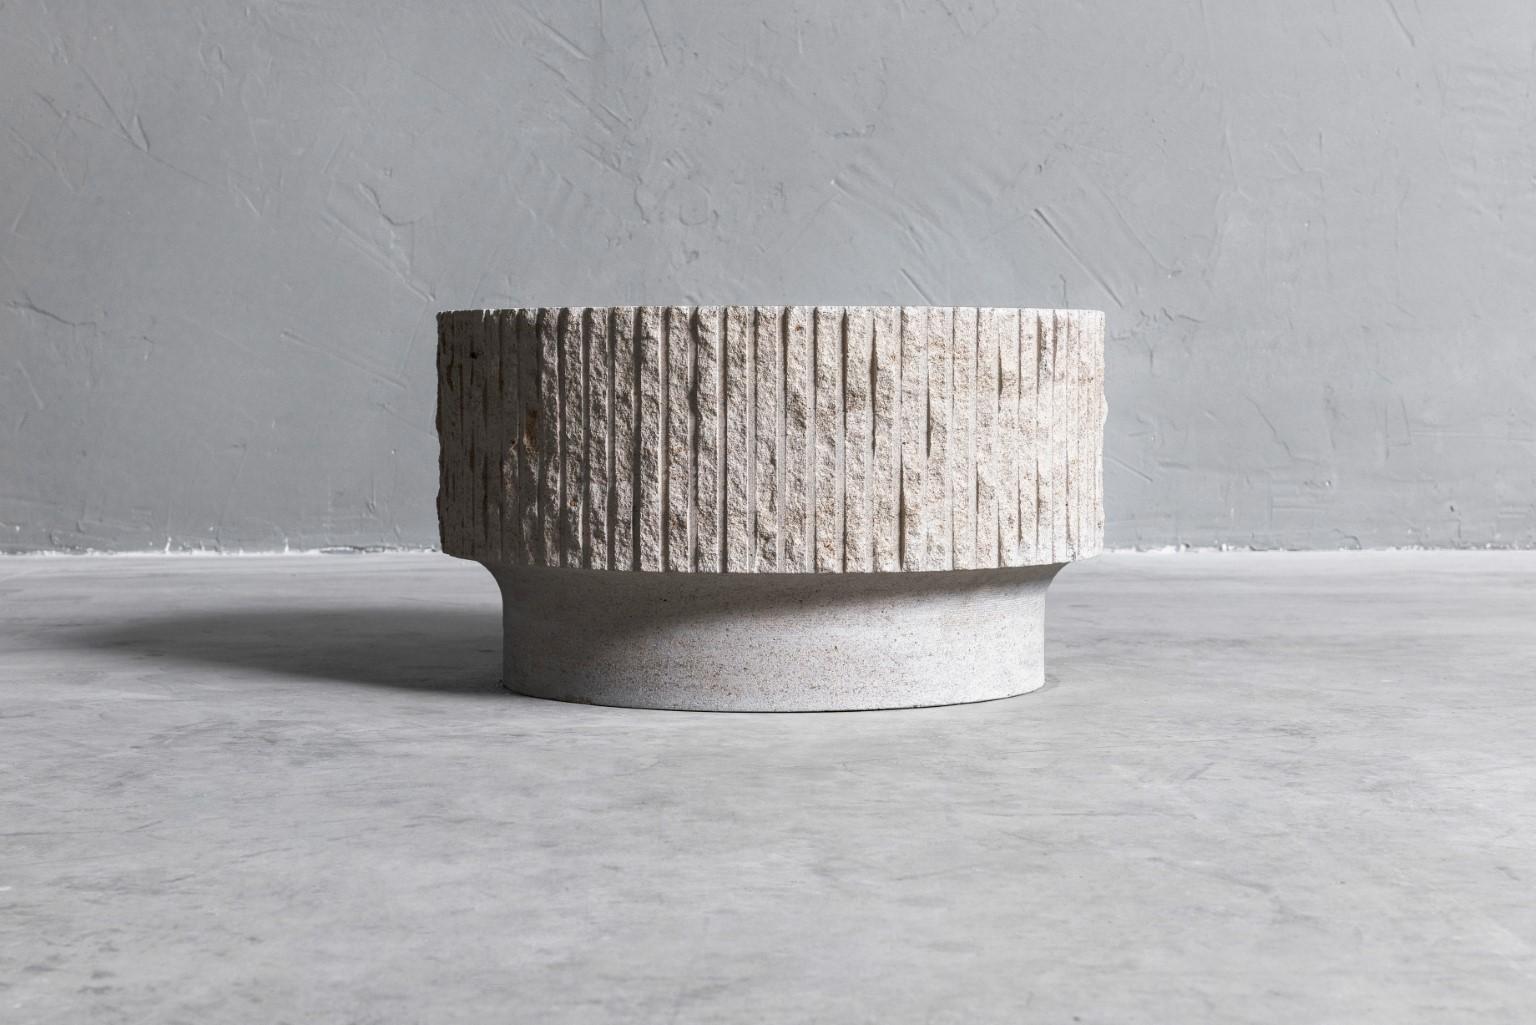 Limestone and brass sculpted coffee table by Frederic Saulou
Large coffee table
Materials: Buffon Limestone, patinated brass.
Measures: H 34, D 60 cm, approximately 130 kg
Limited edition of 12
Title: Ambigue
Signed and numbered.

